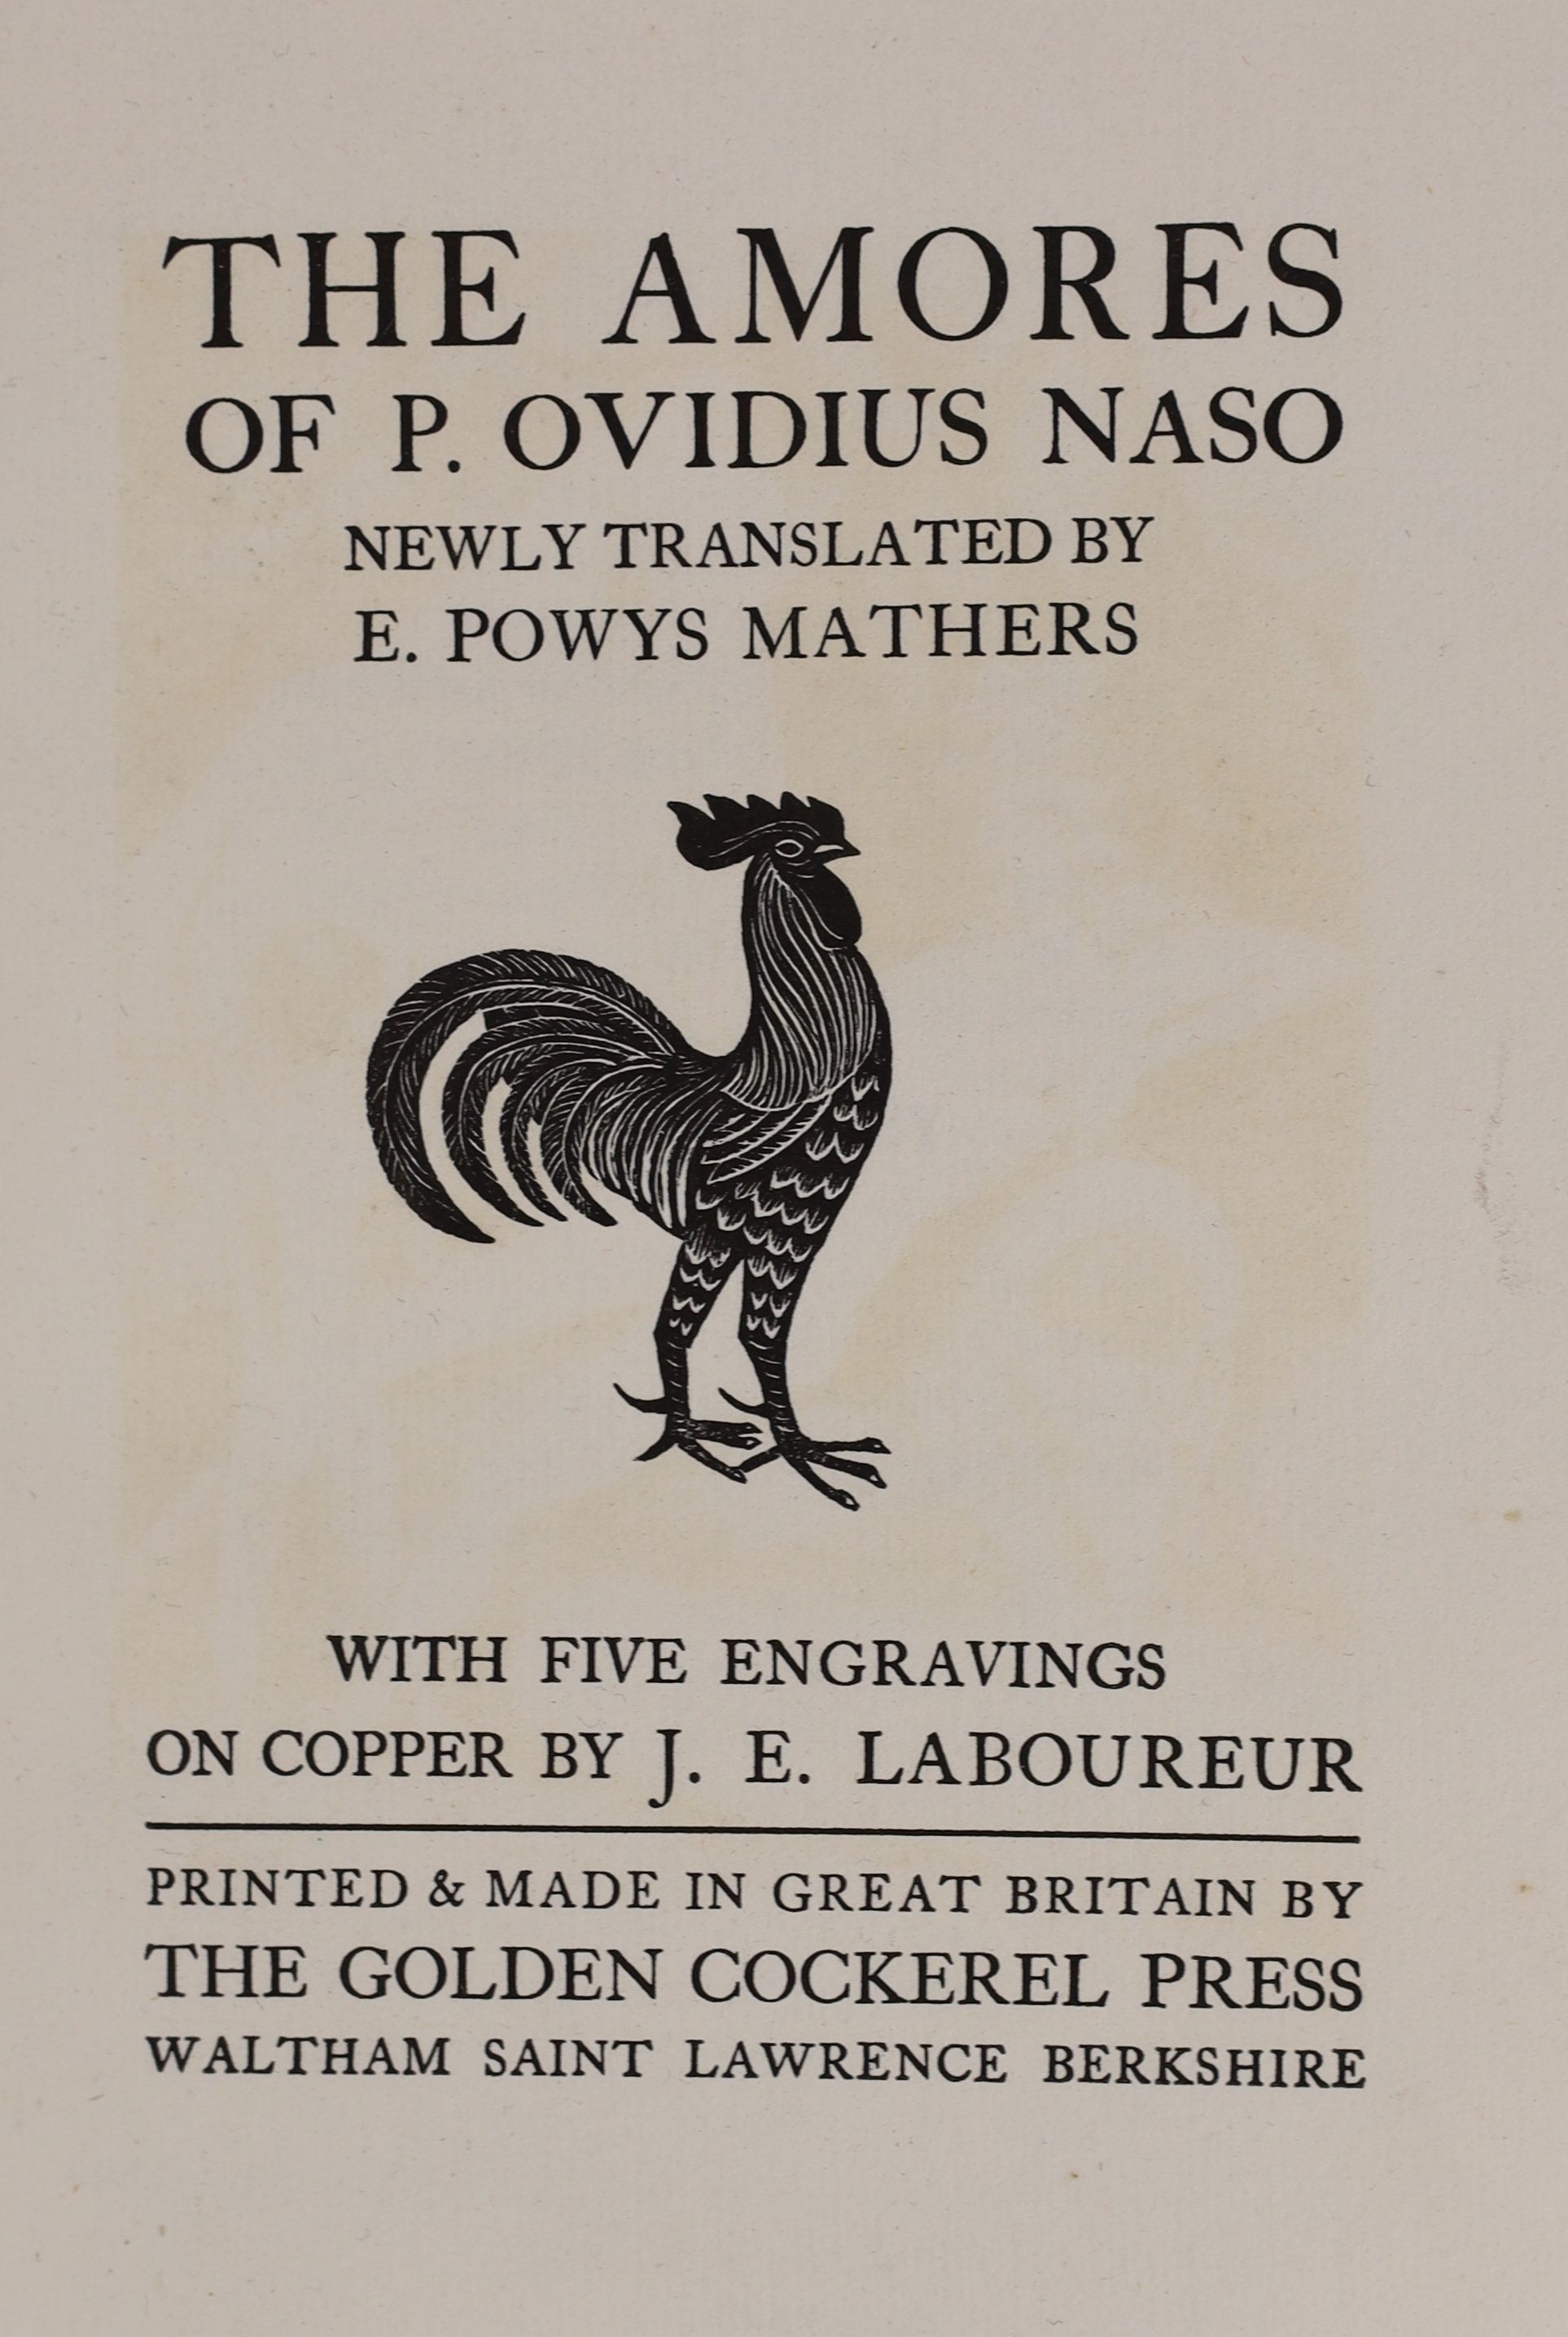 Golden Cockerel Press - Ovid - The Amores, one of 350, translated by E. Powys Mathers, il with 5 engravings by J. E. Leboureur, Waltham Saint Lawrence, 1932